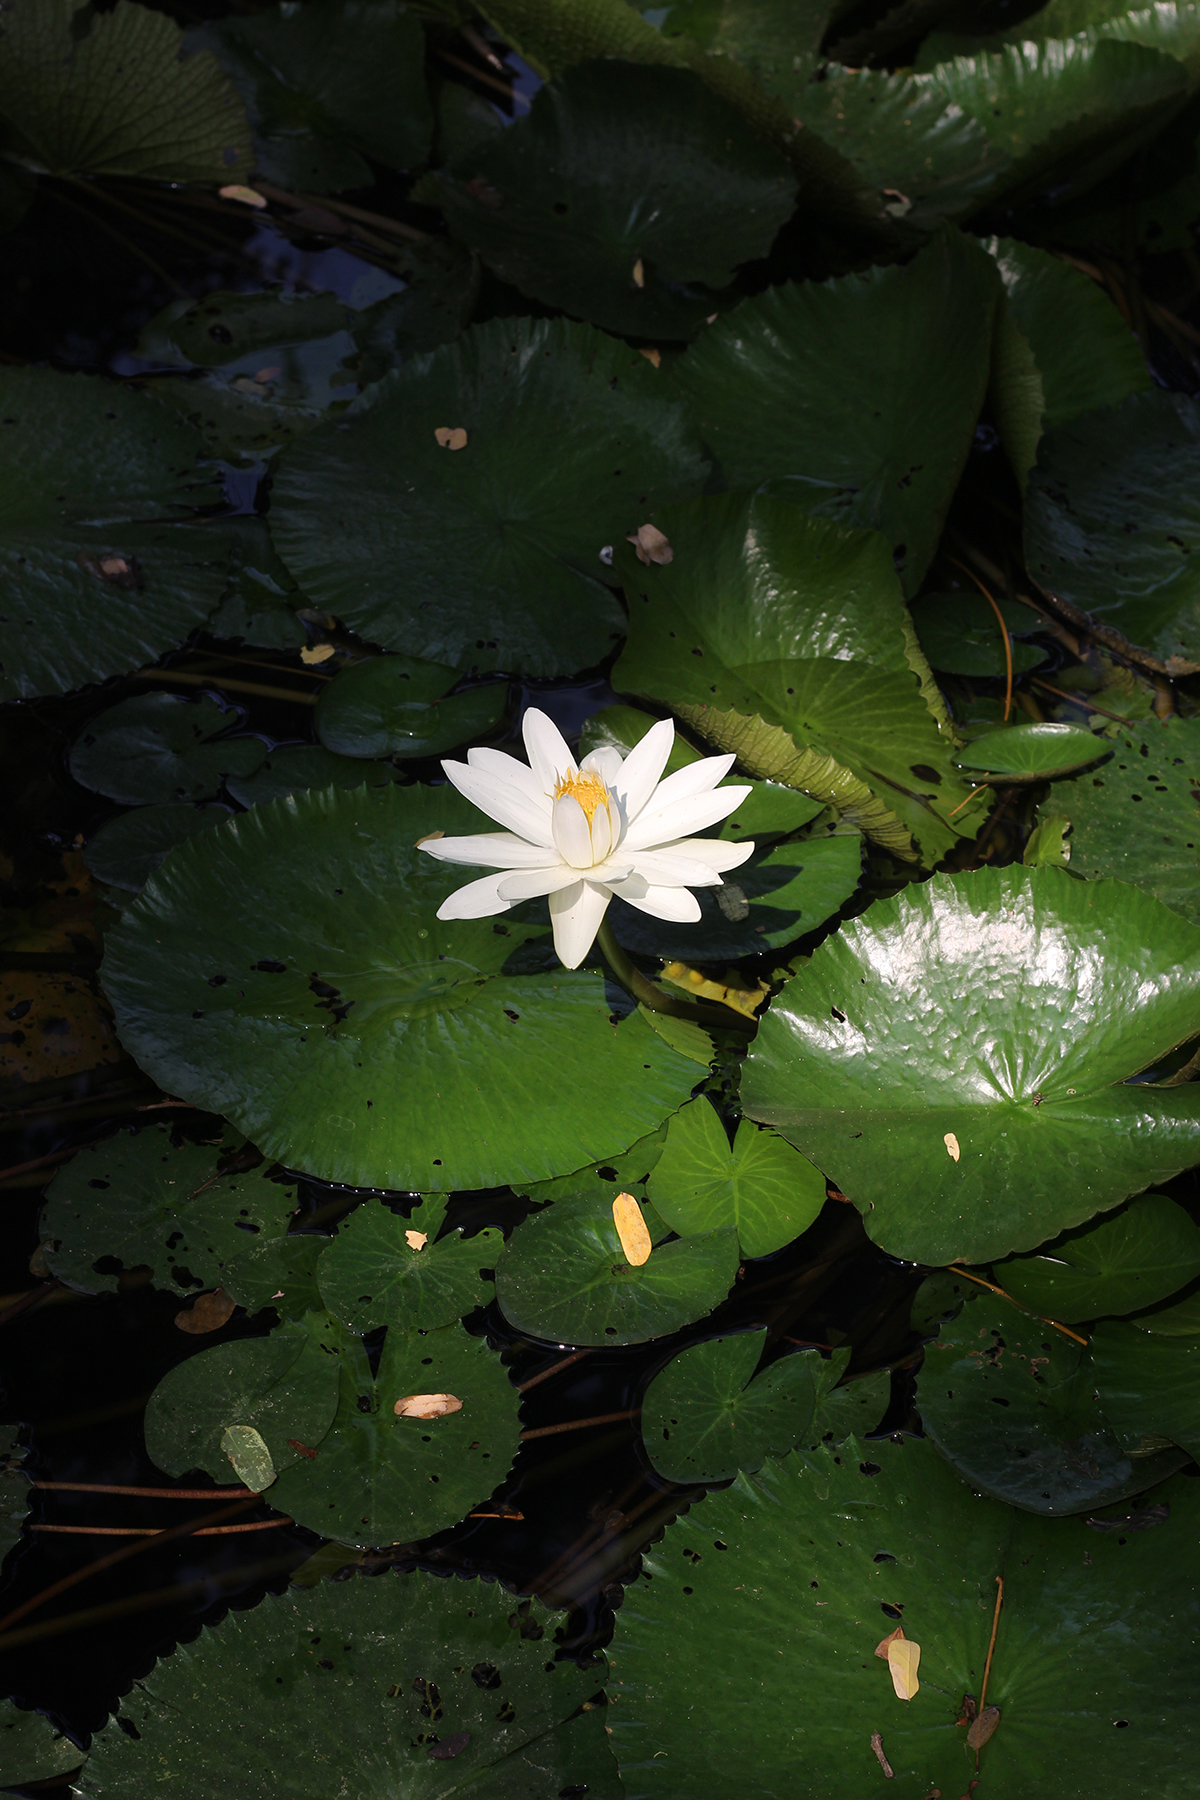 A white lily on lily pads in a pool of water